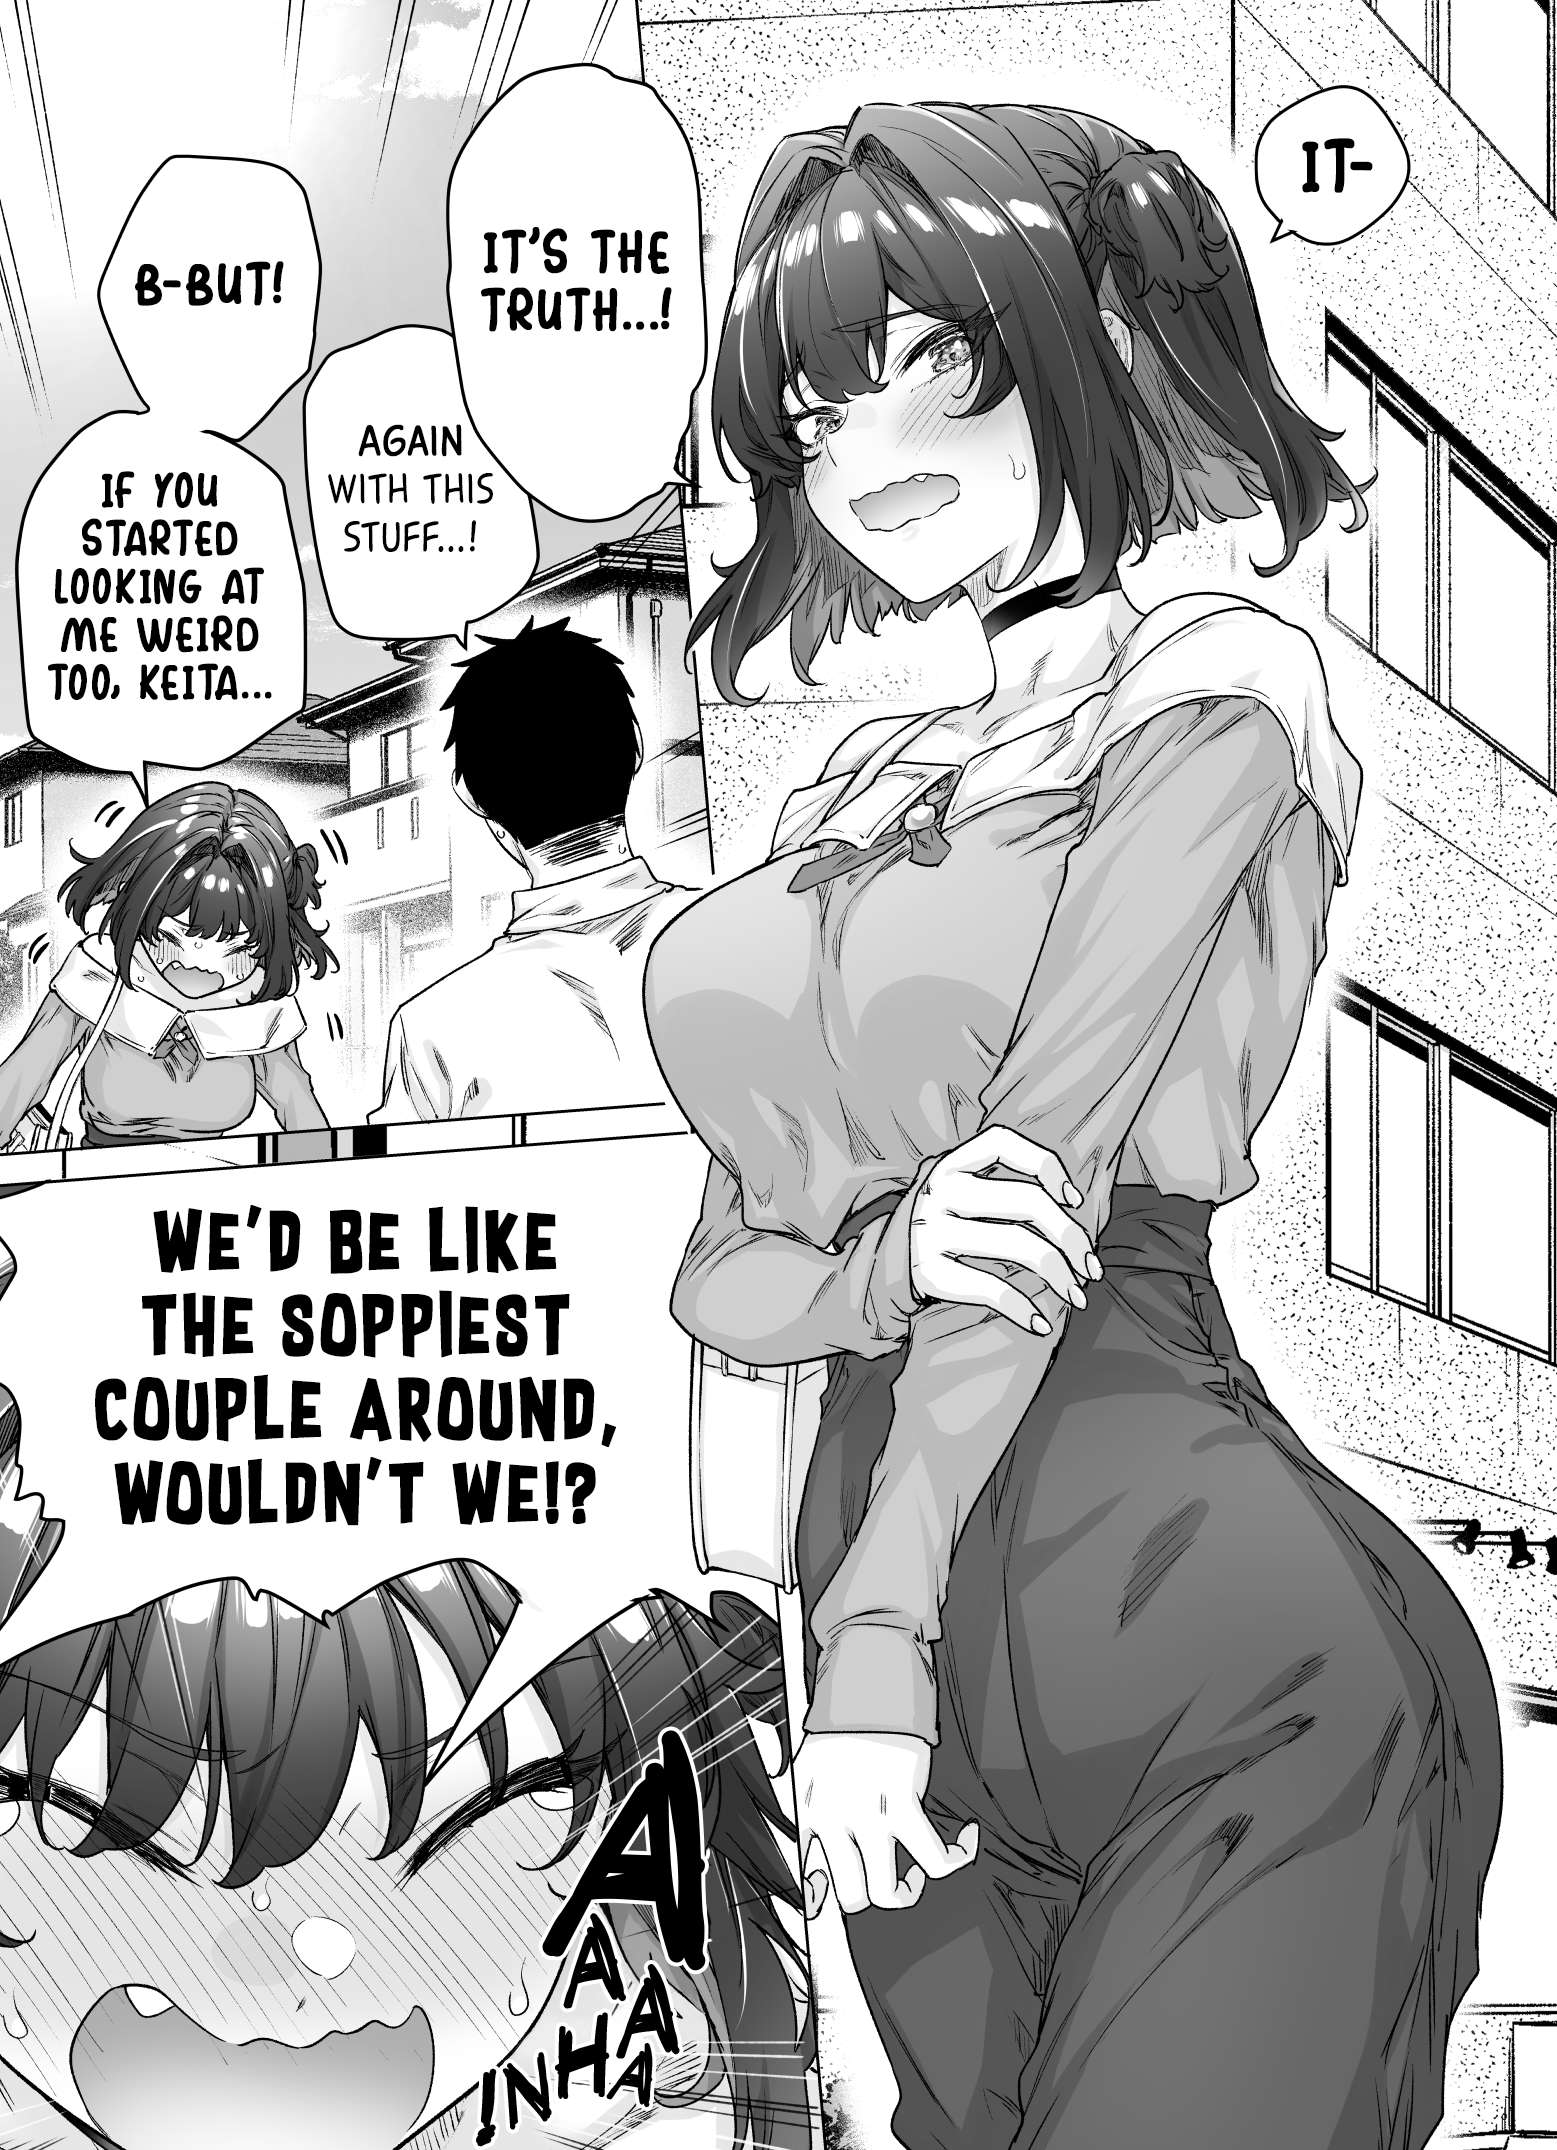 The Tsuntsuntsuntsuntsuntsuntsuntsuntsuntsuntsundere Girl Getting Less and Less Tsun Day by Day - chapter 99 - #2